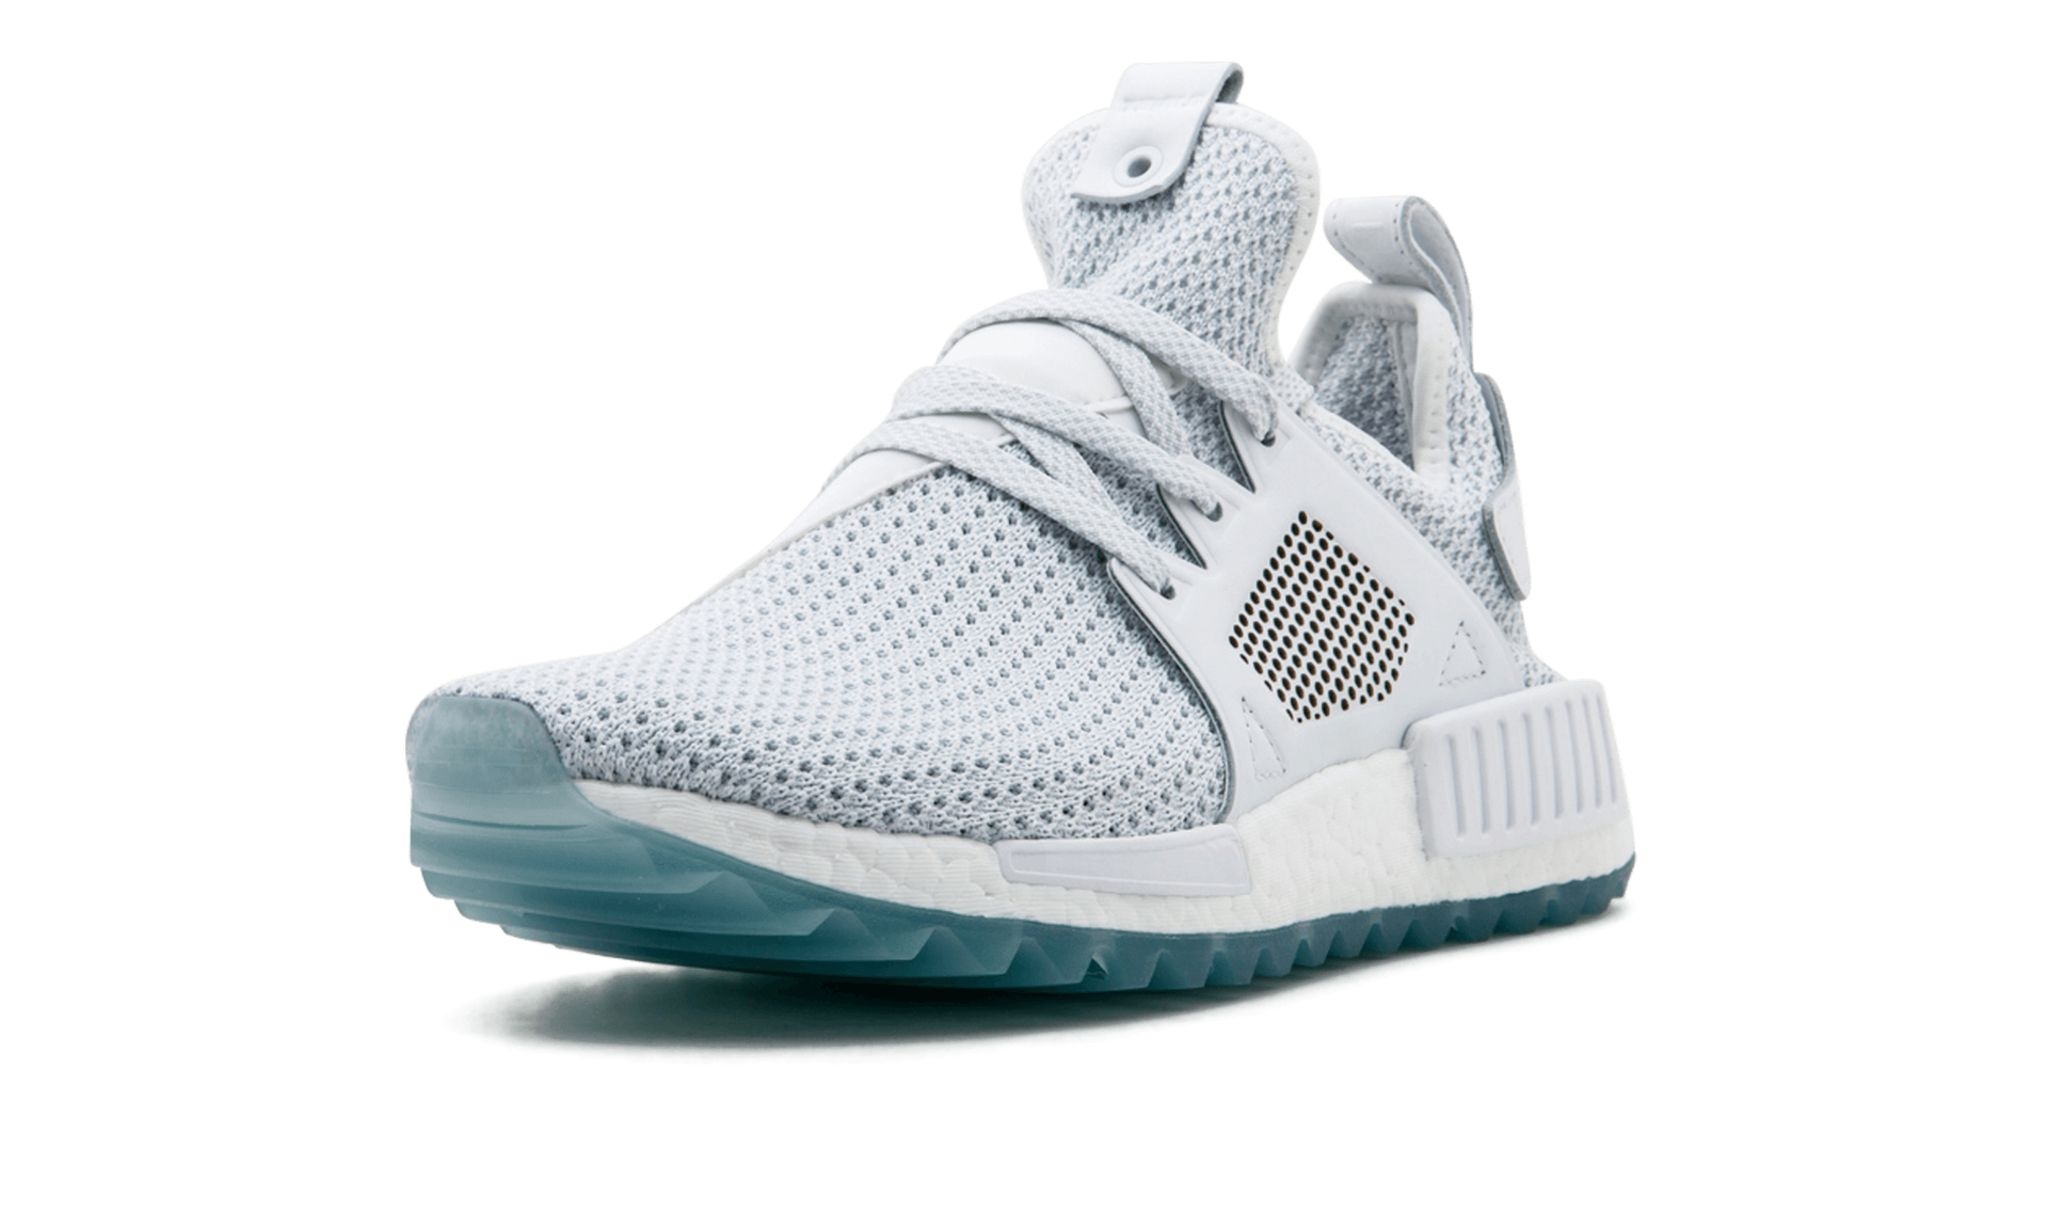 NMD_XR1 TR Titolo "Celestial" - 4